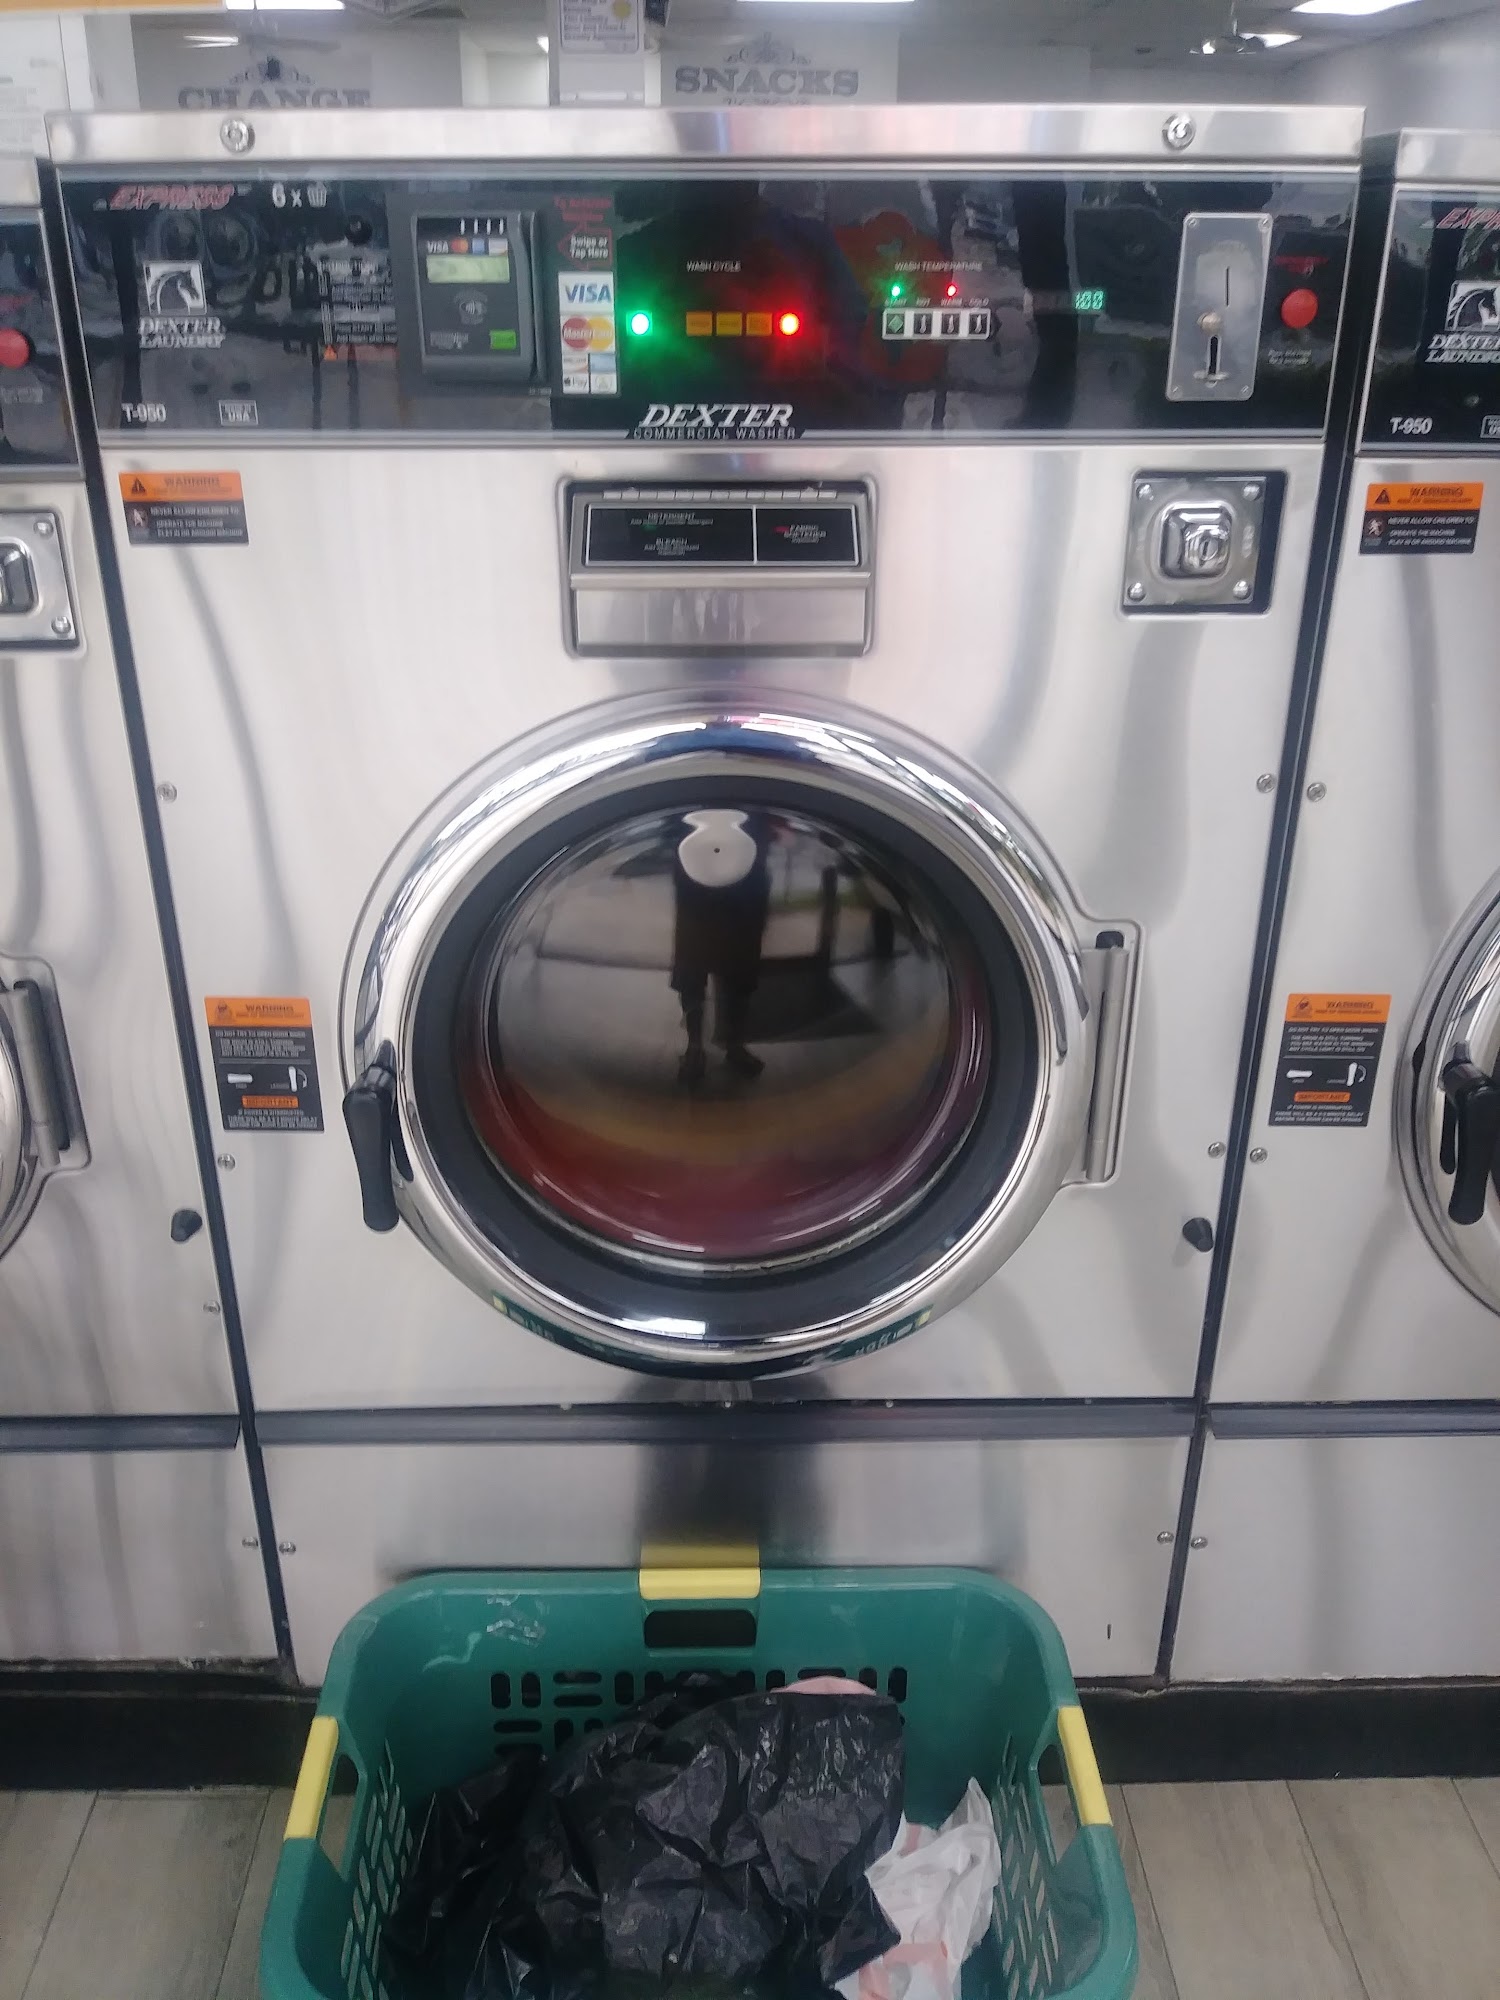 Dania Beach Coin Laundry & Dry Cleaners